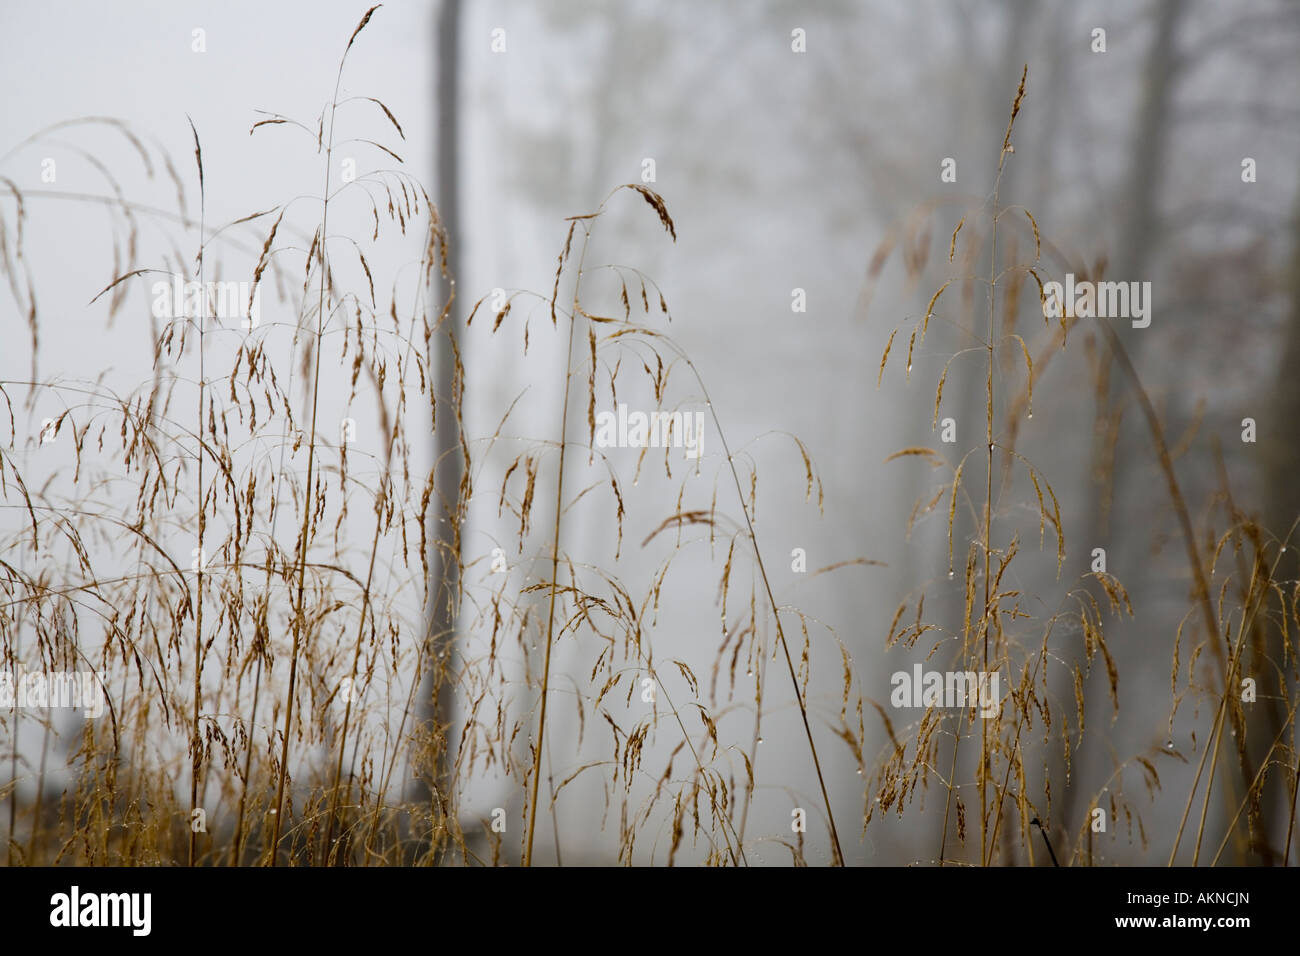 Thick fog obscures the trees behind the dead heads of Deschampsia caespitosa Stock Photo